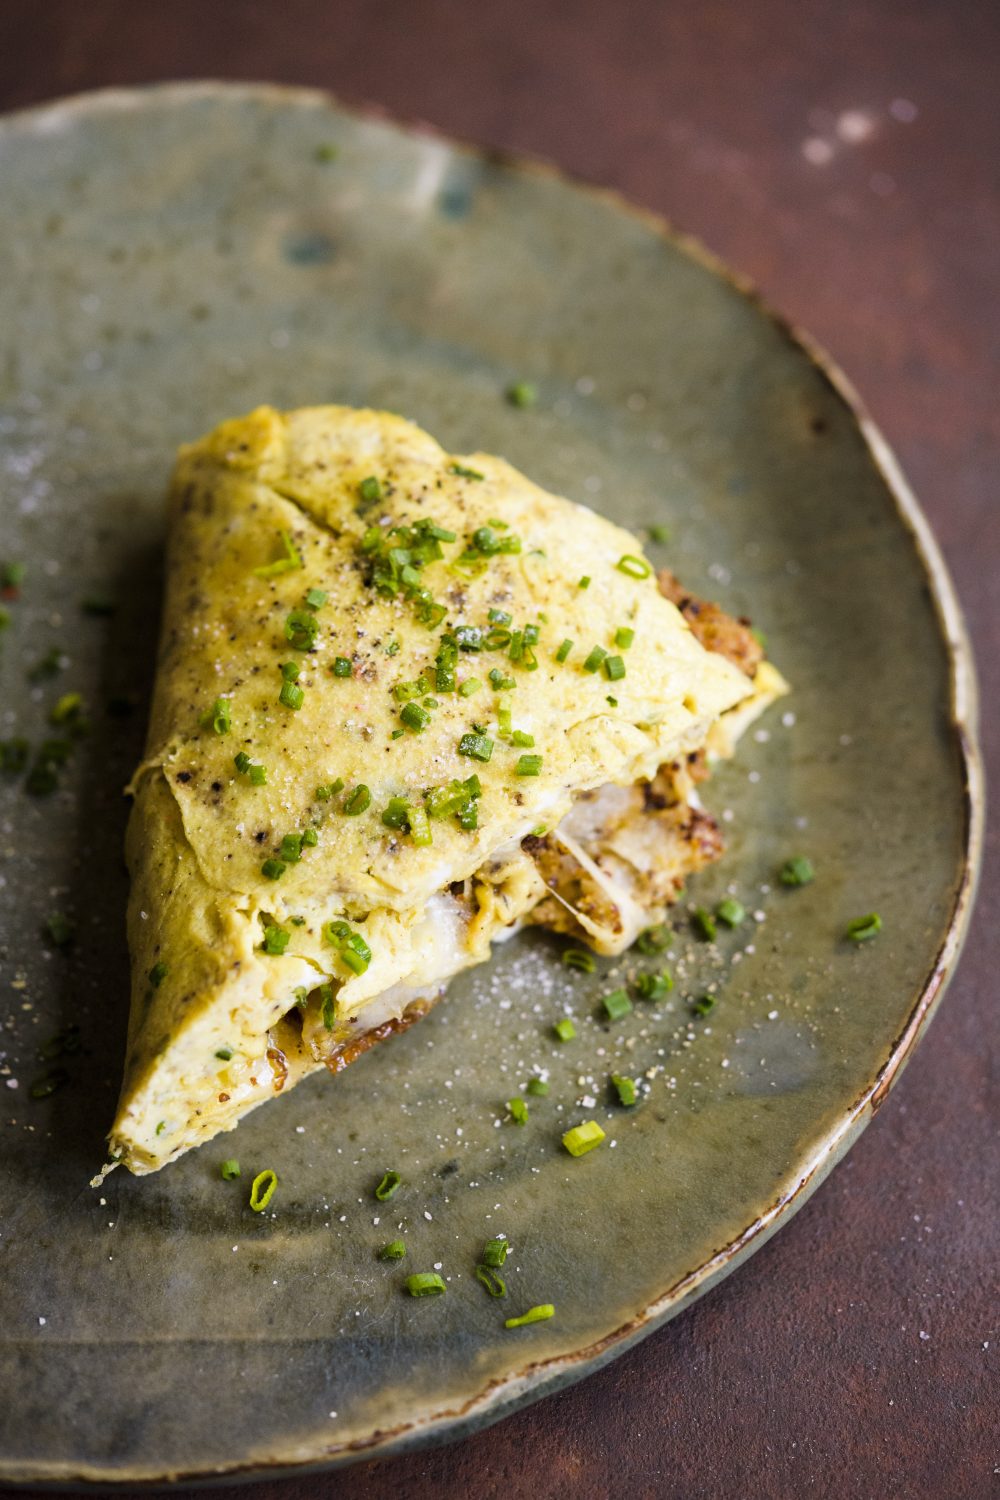 Gruyère and Chive Omelet